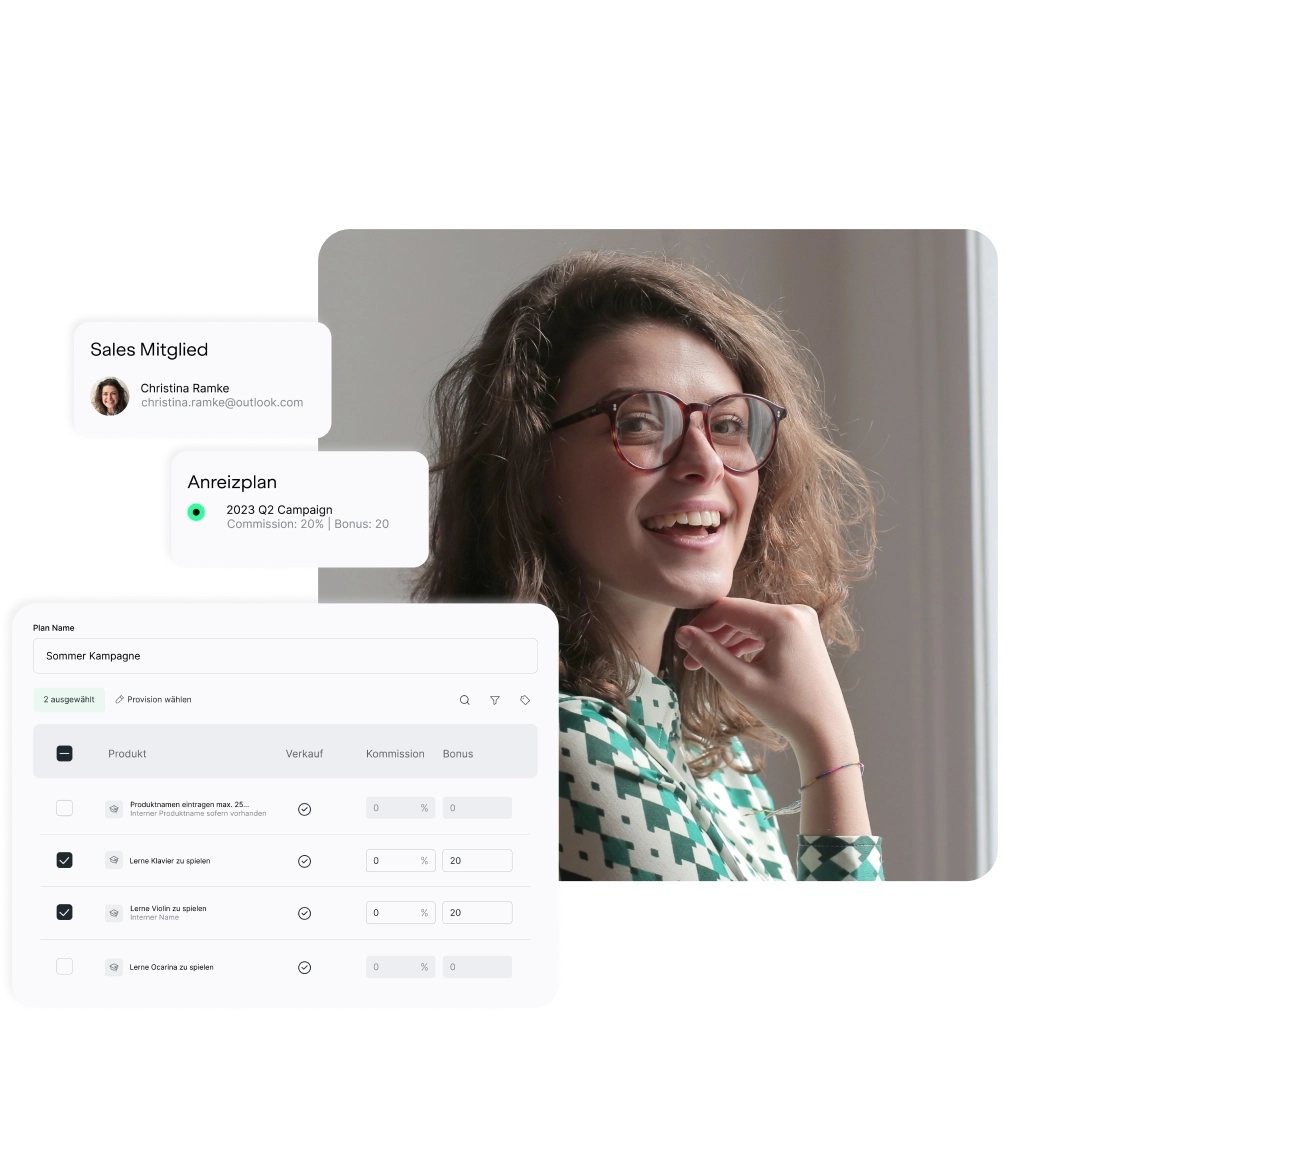 Manage your sales team members on one platform